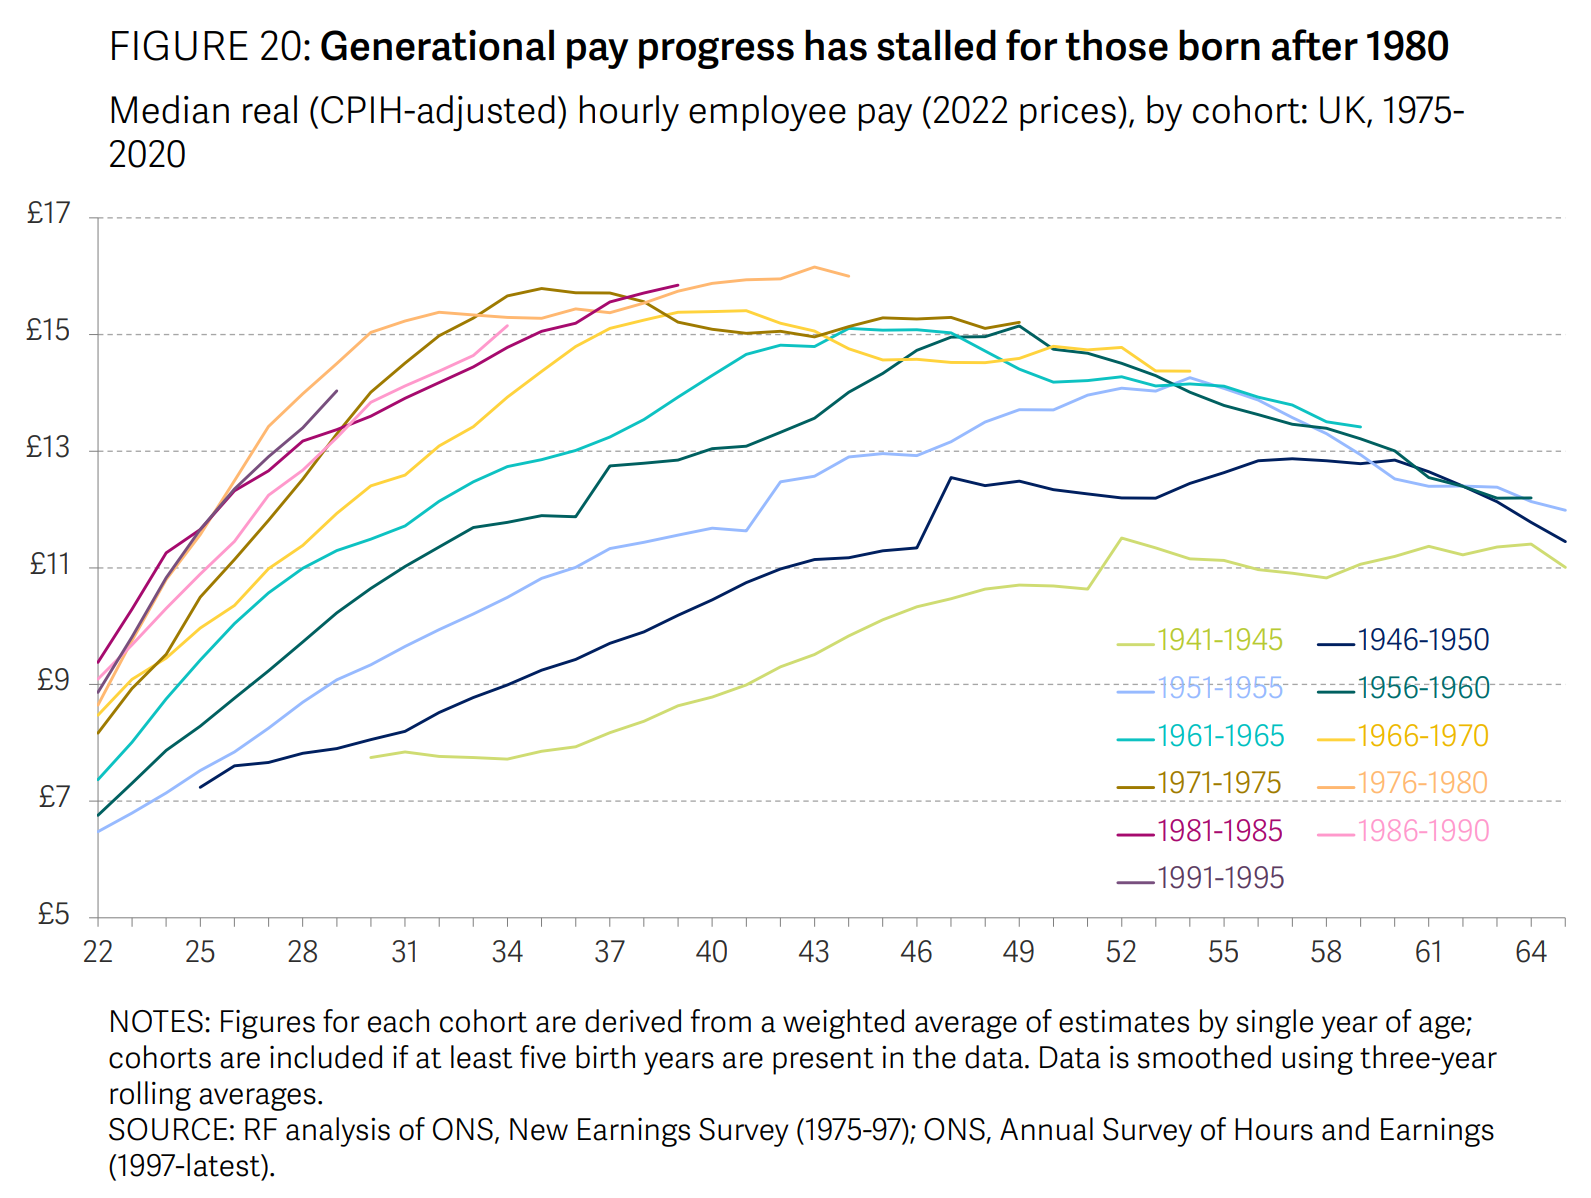 Median real (CPIH-adjusted) hourly employee pay (2022 prices) by cohort in the UK, 1975-2020. Generational pay progress has stalled for those born after 1980. Graphic: Resolution Foundation